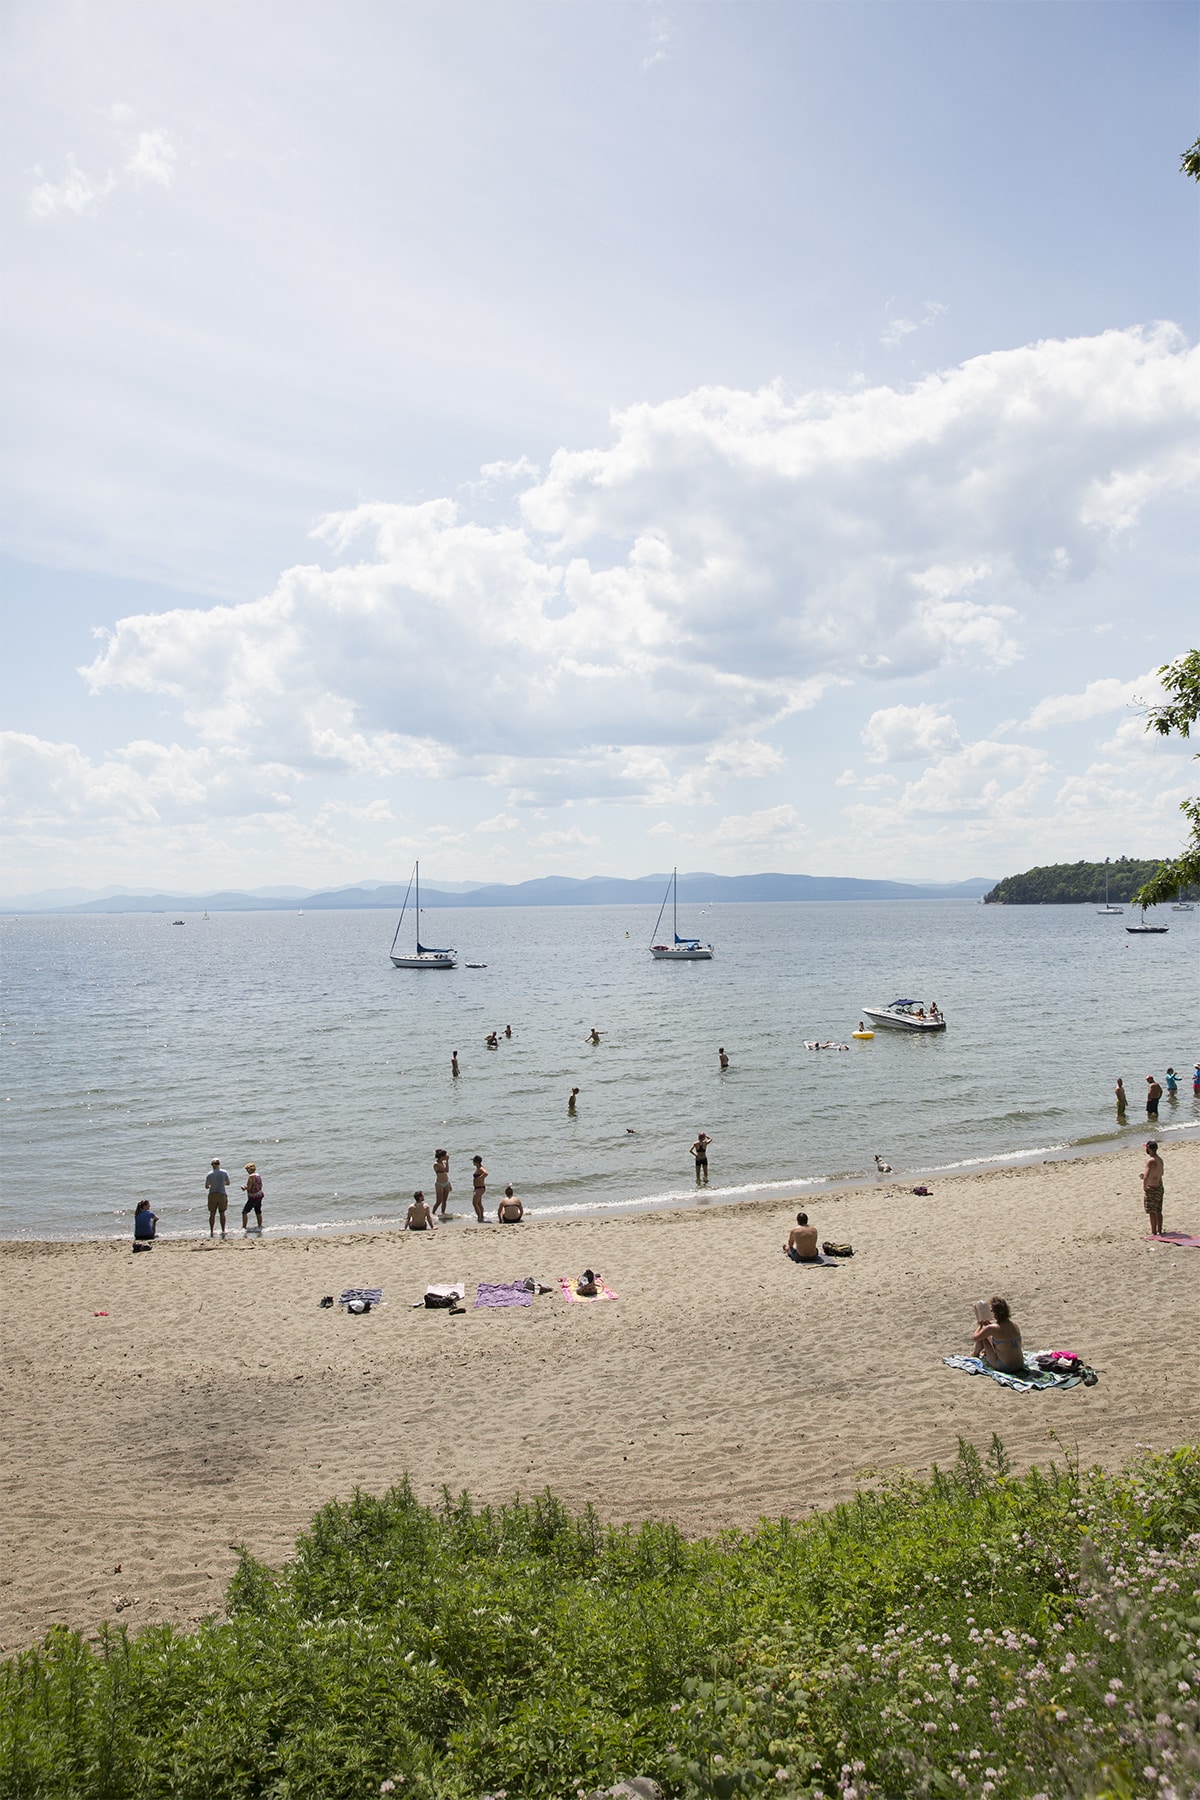 Summer is in full swing at North Beach Park. We passed this scene on the way to Charlie's Boathouse. You get a great view of the beach from the bike path.